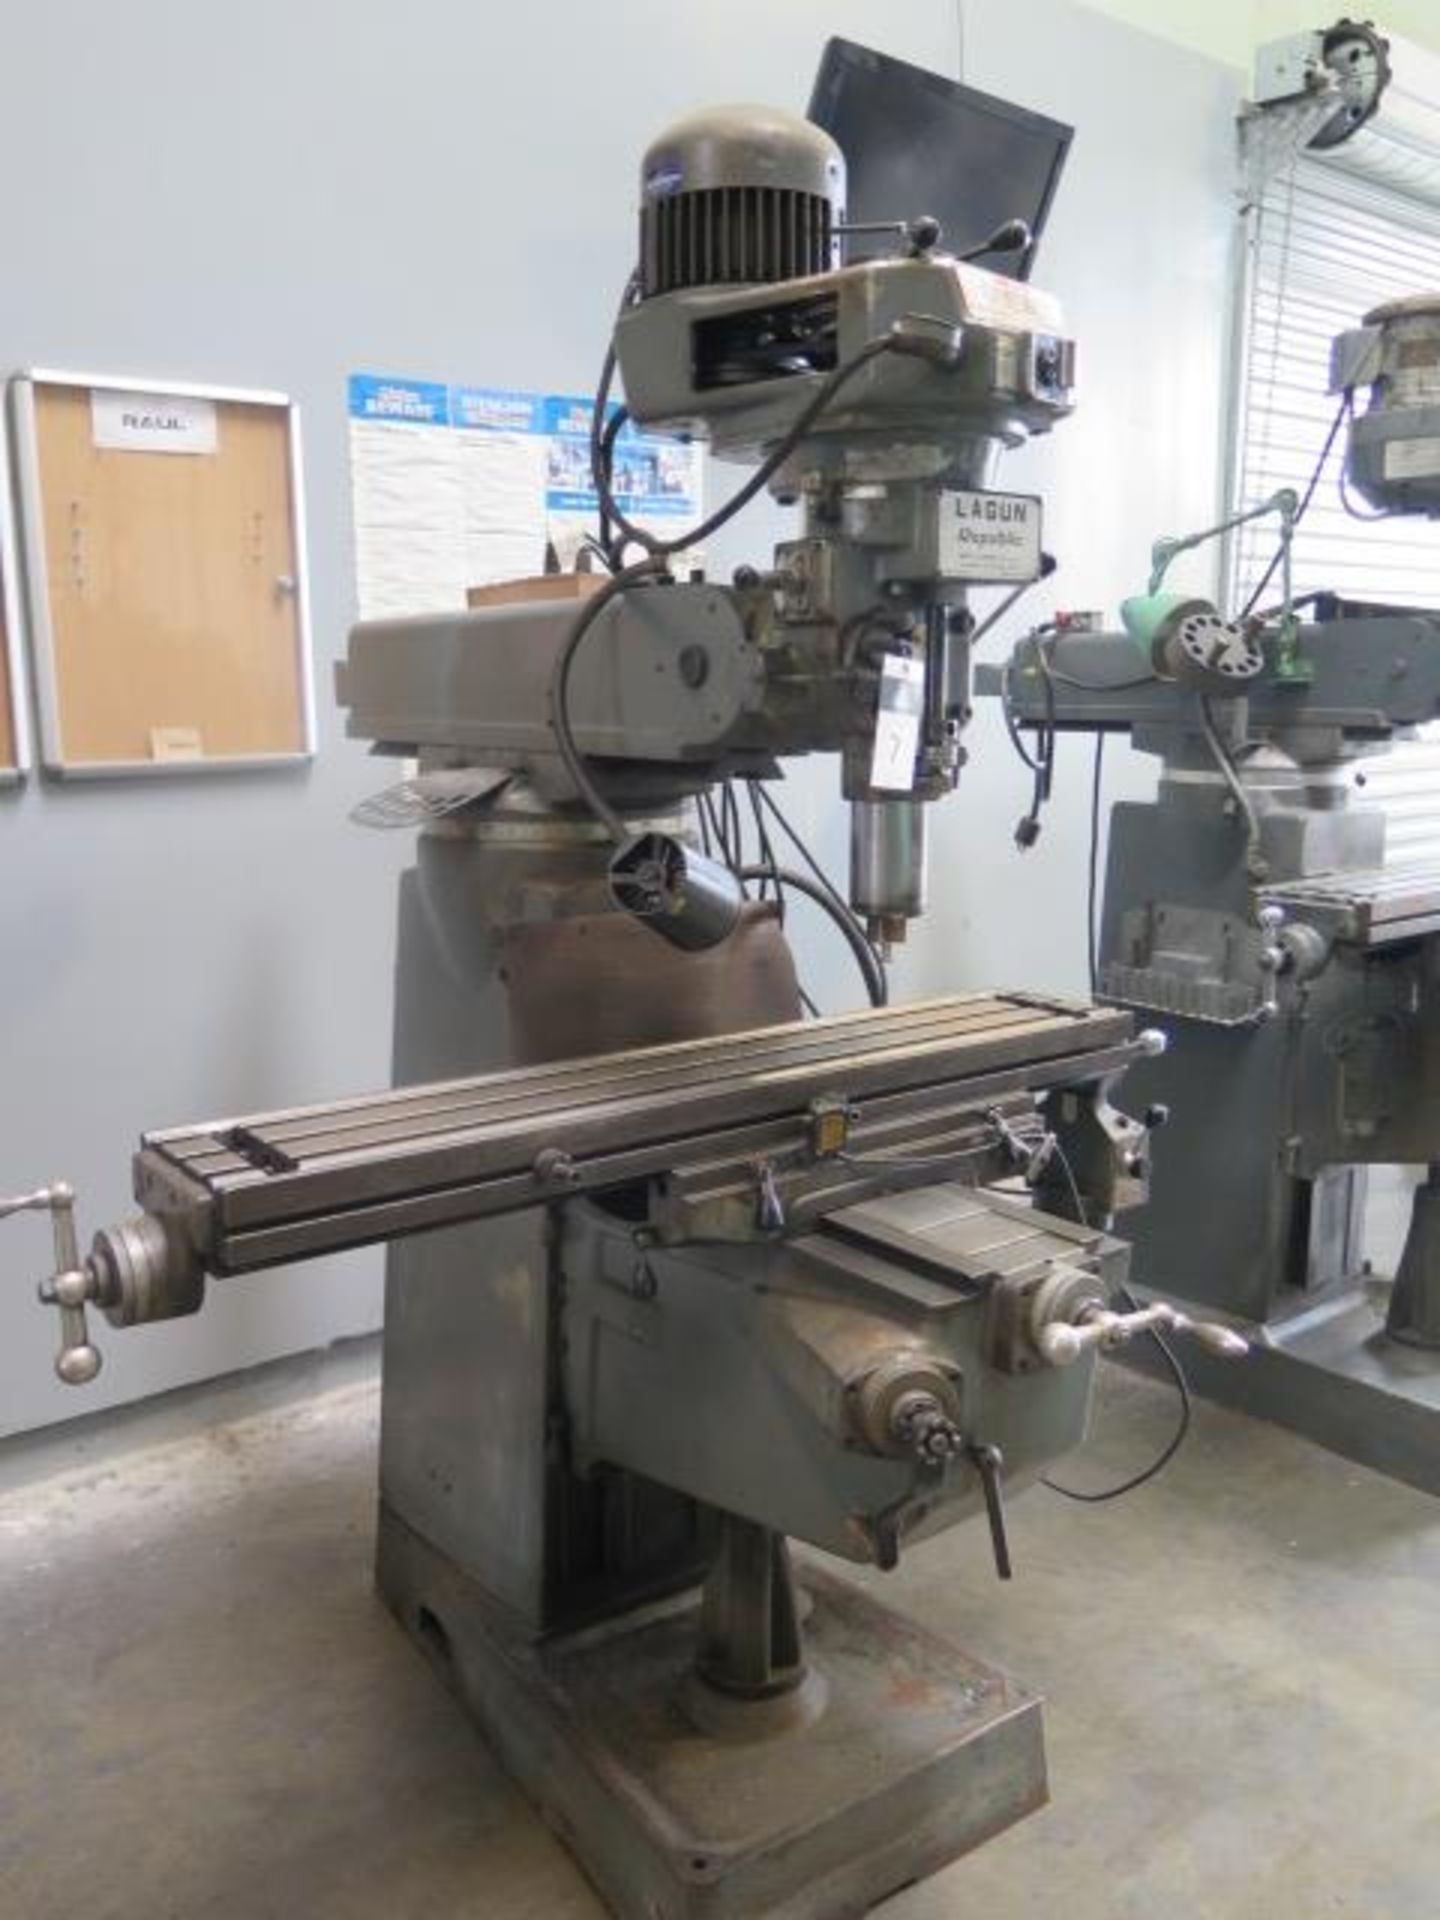 Lagun FT-2 Vertical Mill w/ 55-2940 RPM, 8-Speeds, Chrome Ways, Power Feed, 9” x 48” SOLD AS IS - Image 3 of 10